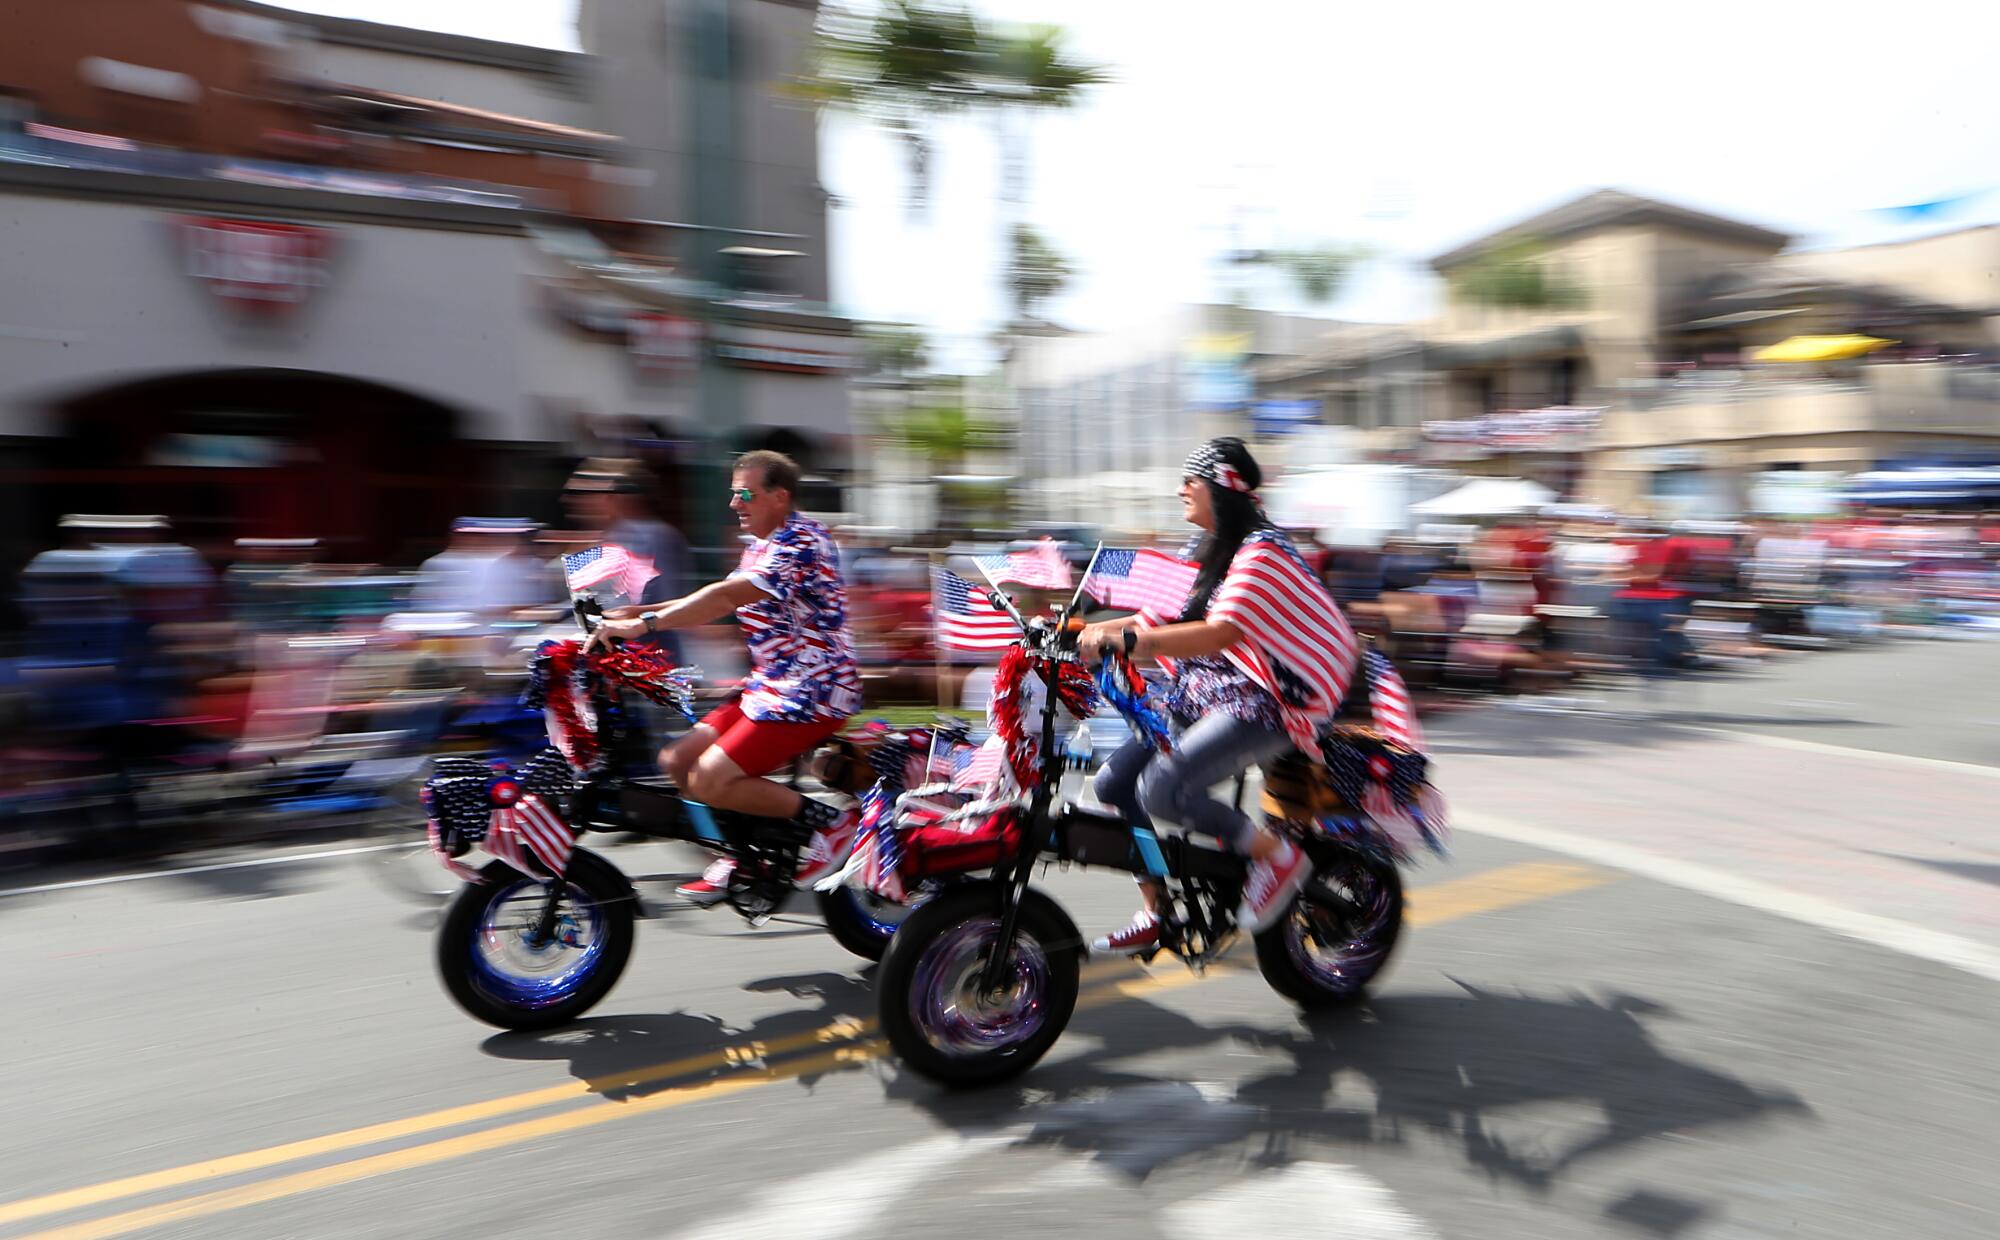 Cyclists ride flag-decked bicycles on Main Street